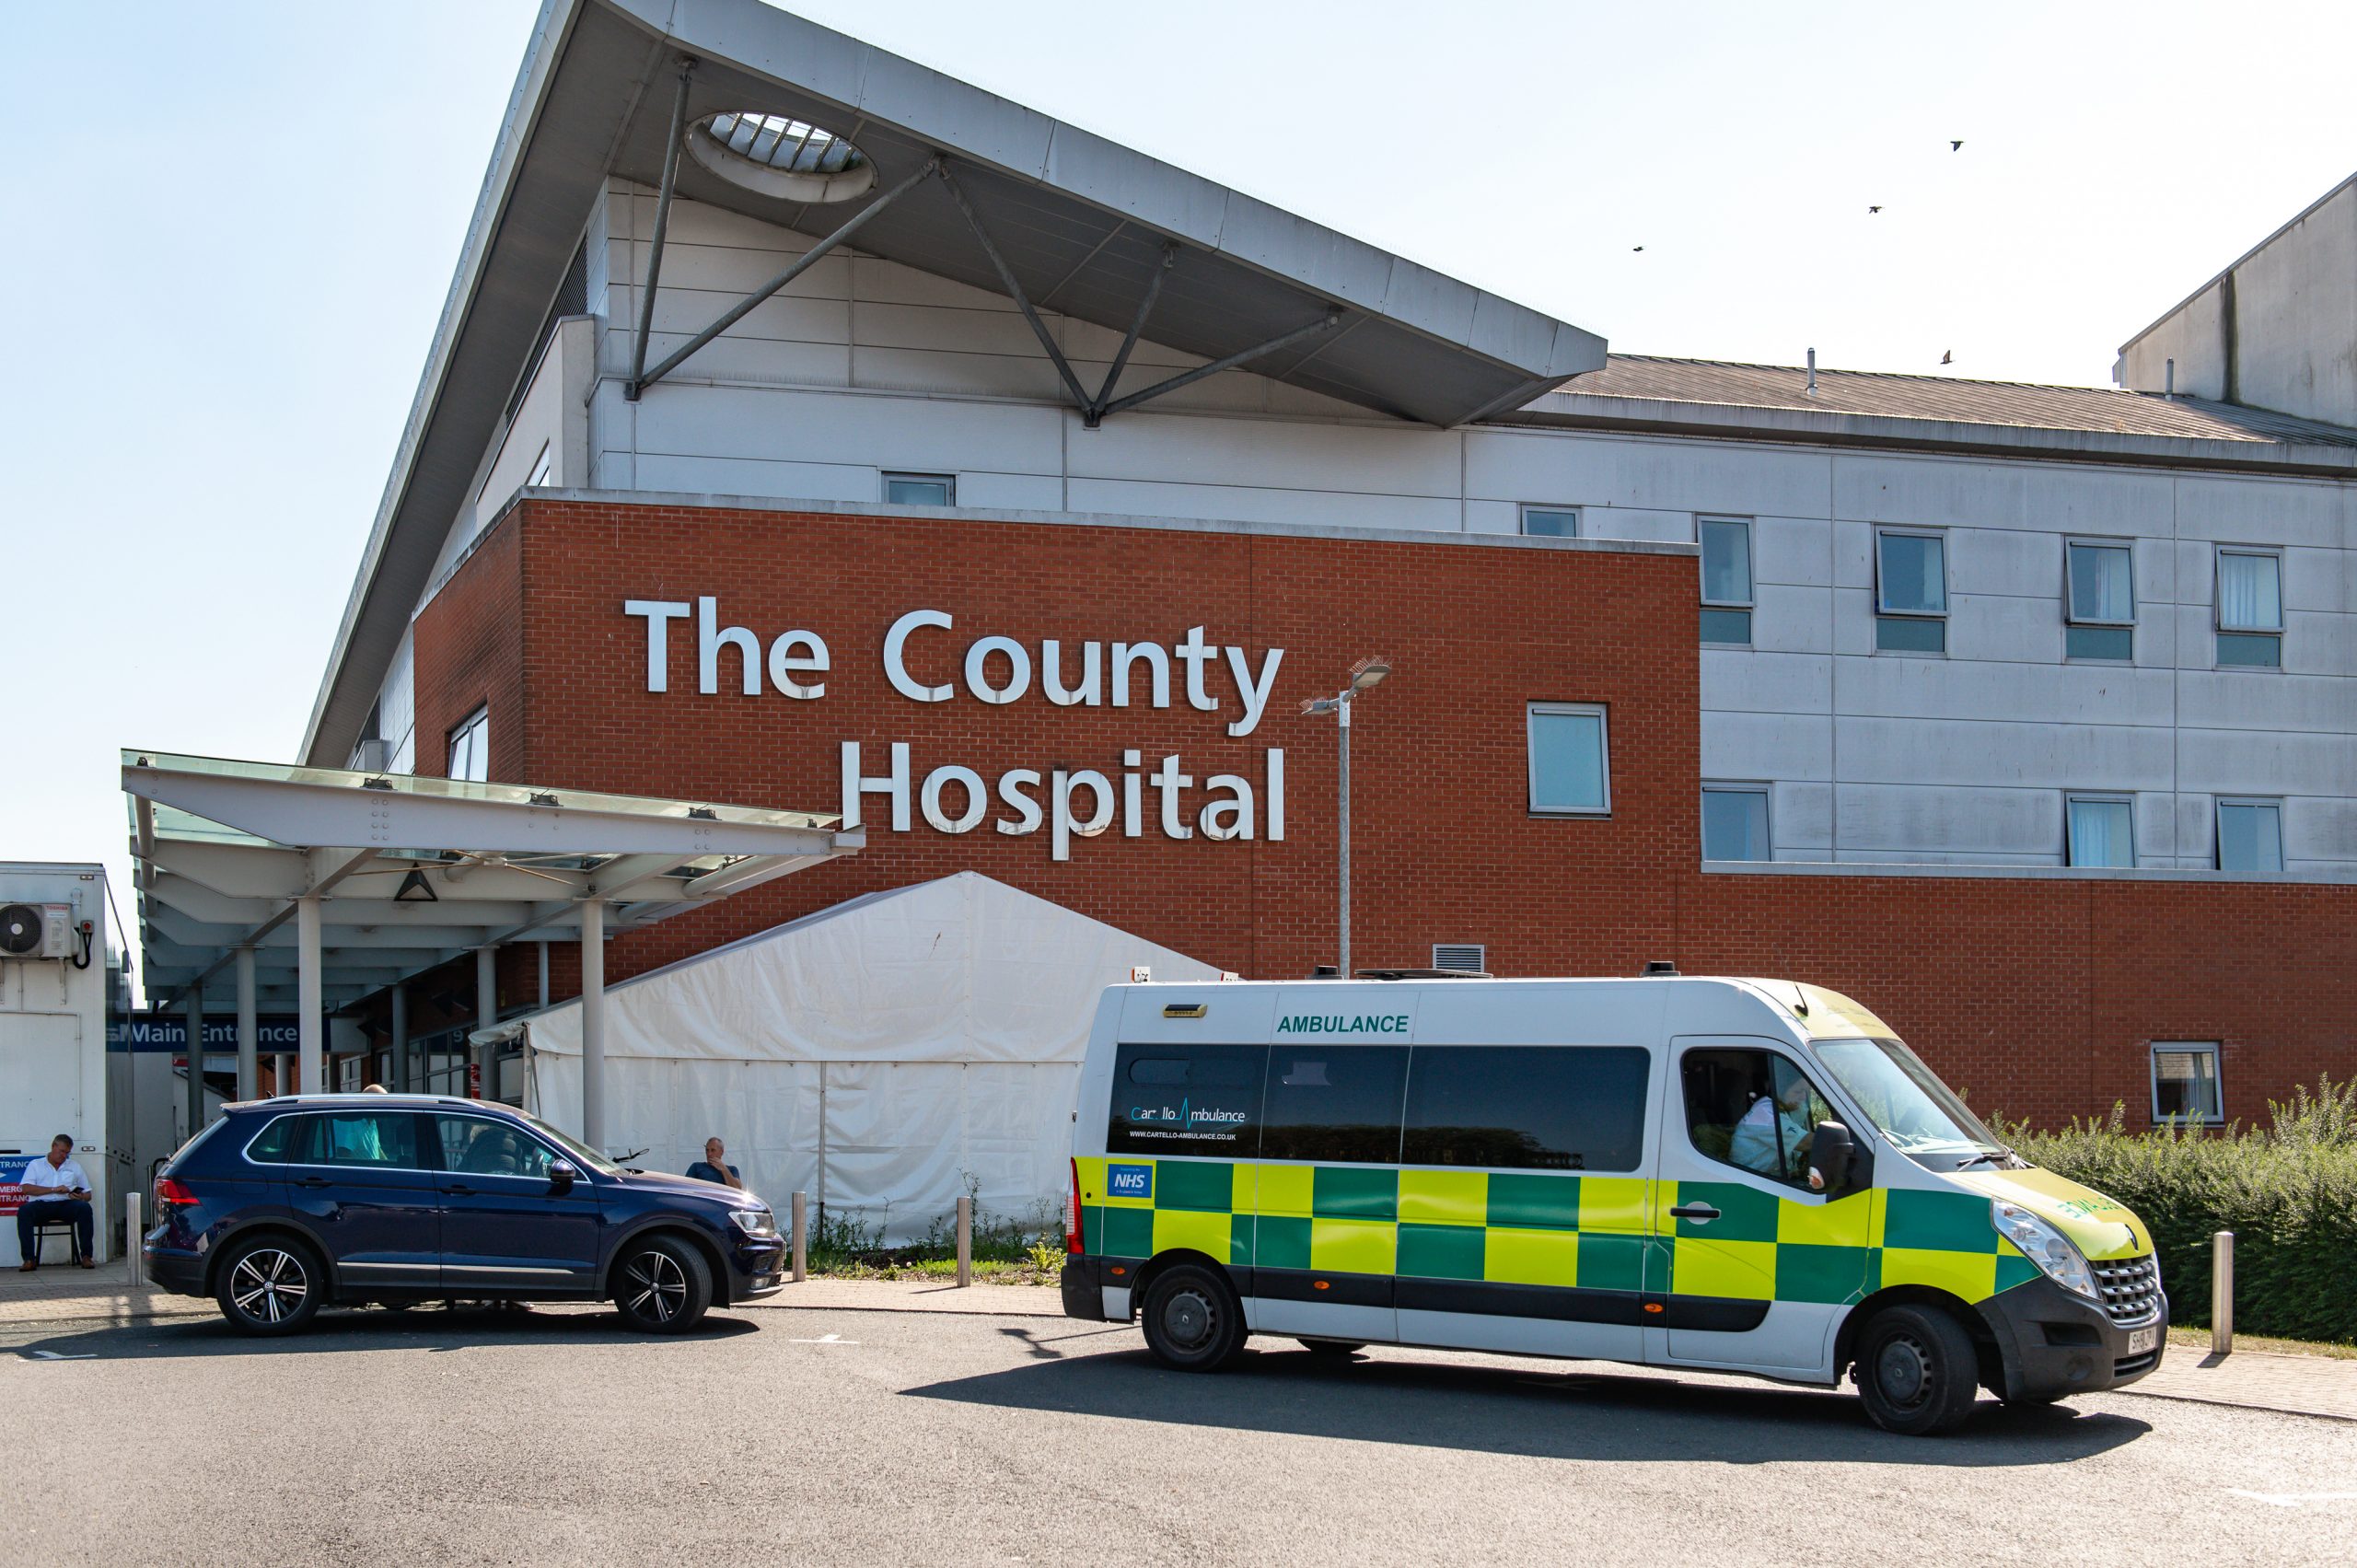 NEWS | There has been an increase in the number of patients with COVID-19 at hospital in Herefordshire